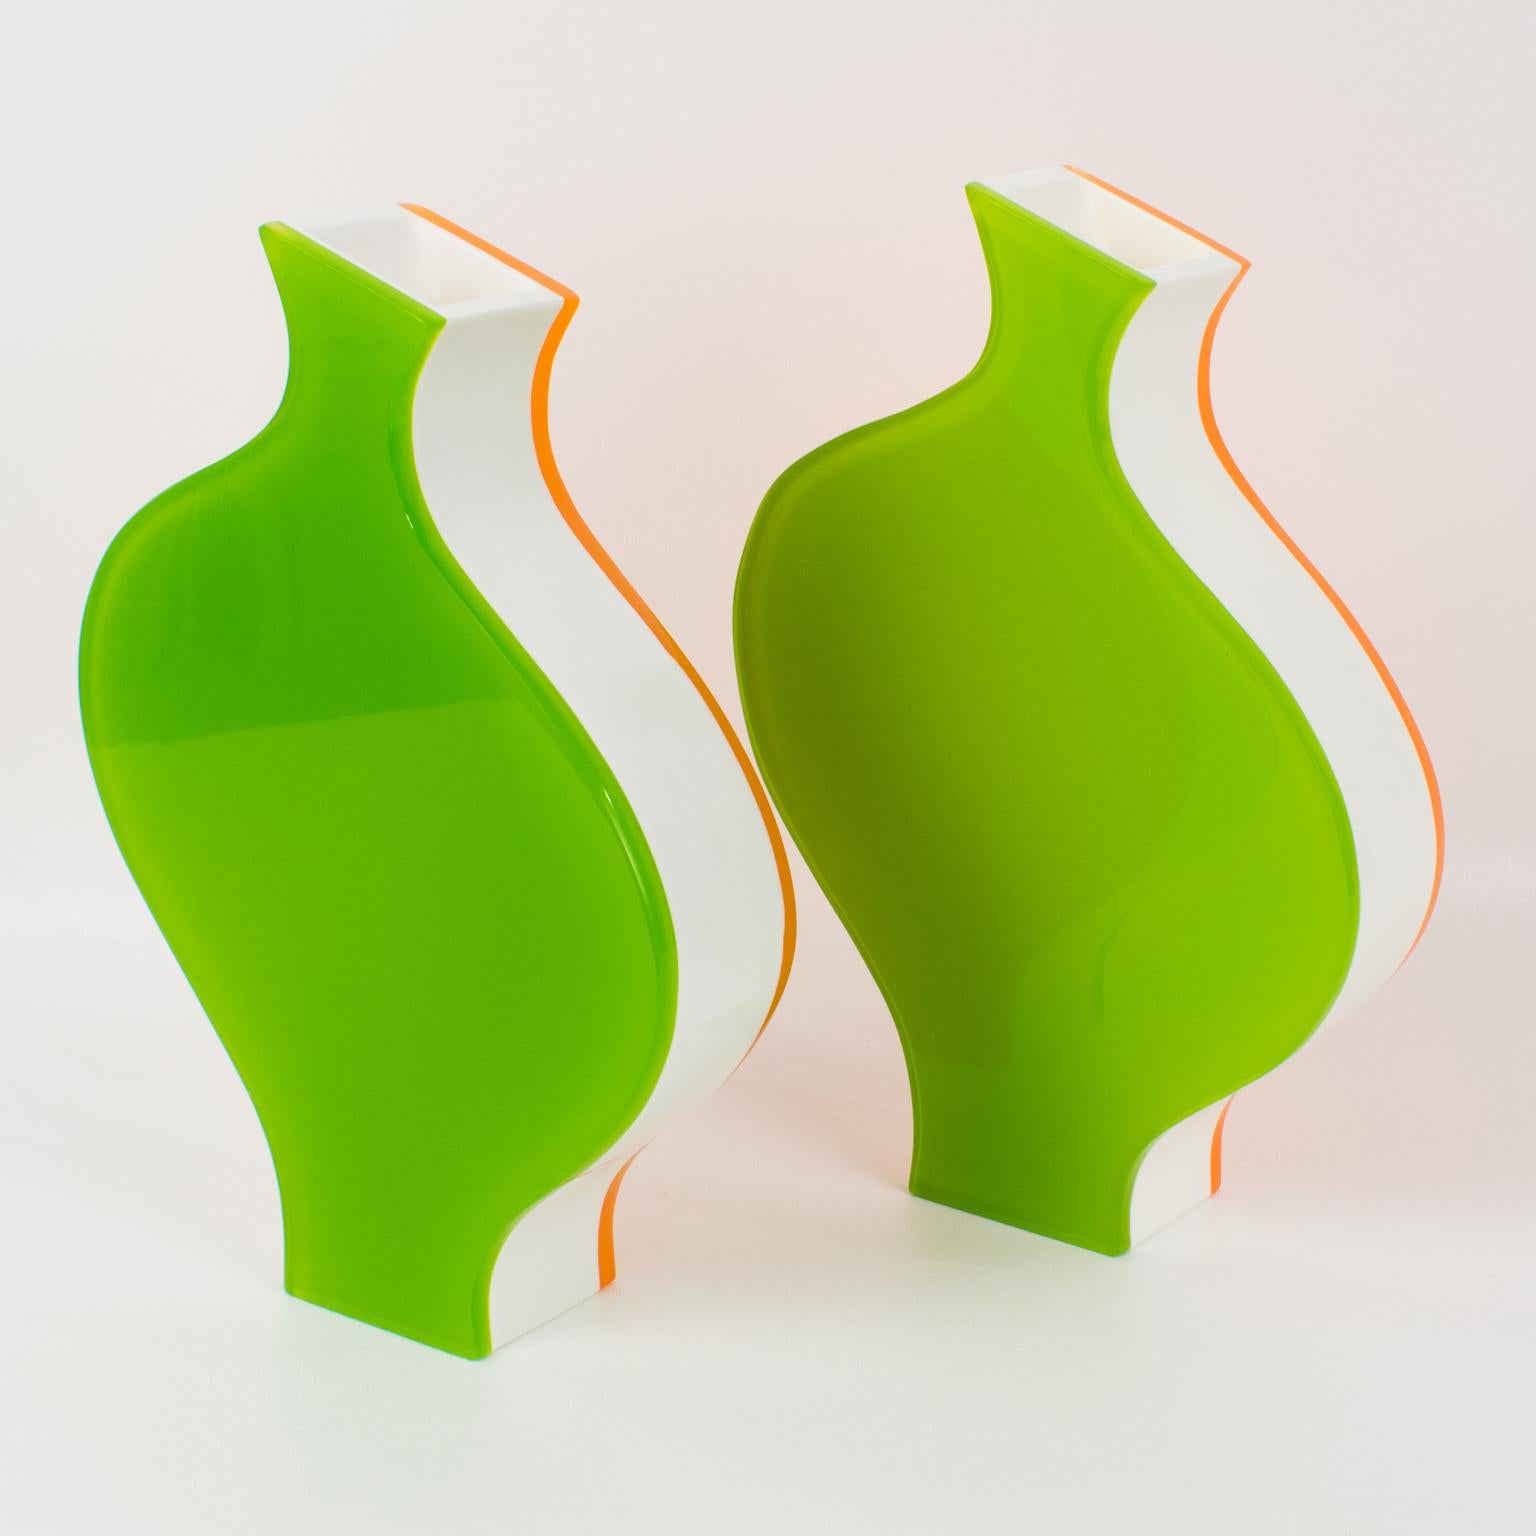 Acrylic Villeroy & Boch Orange and Green Plexiglass or Lucite Vases, 1990s